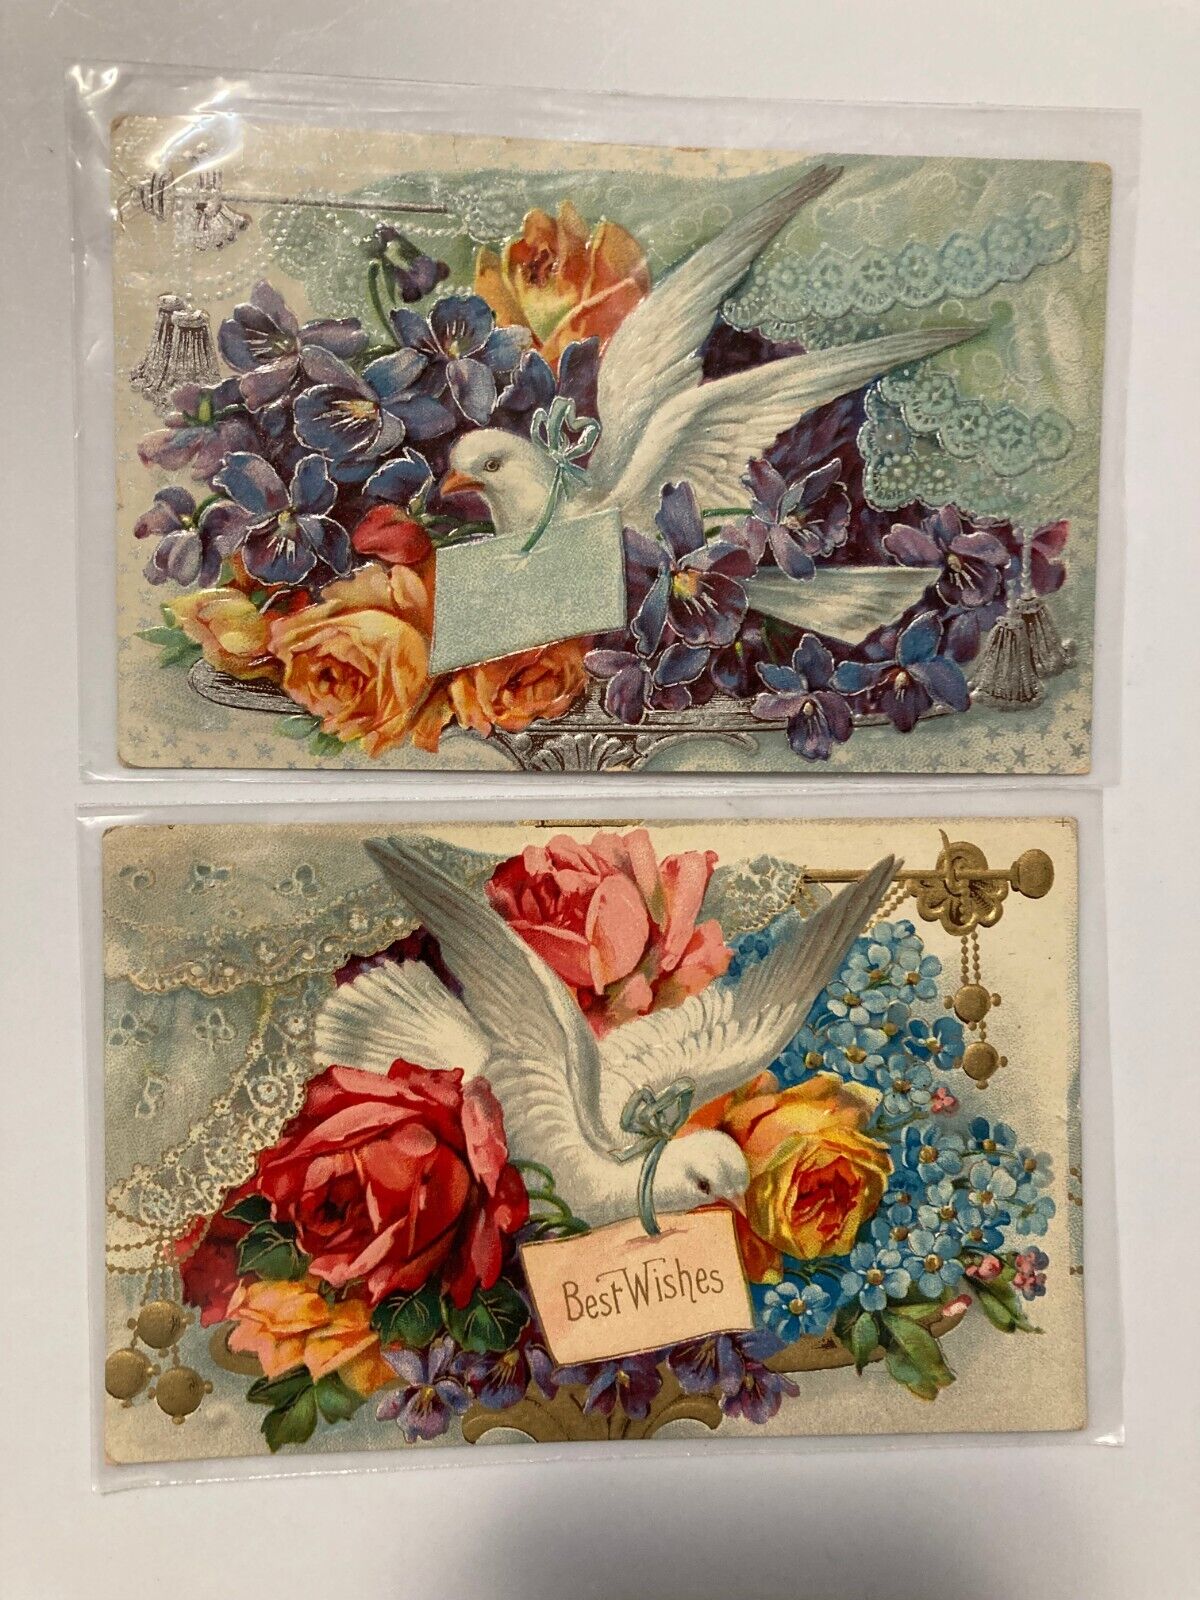 1913 Dove Birds & Flowers Birthday Greetings, Best Wishes Postcards Lot of 2 EMB